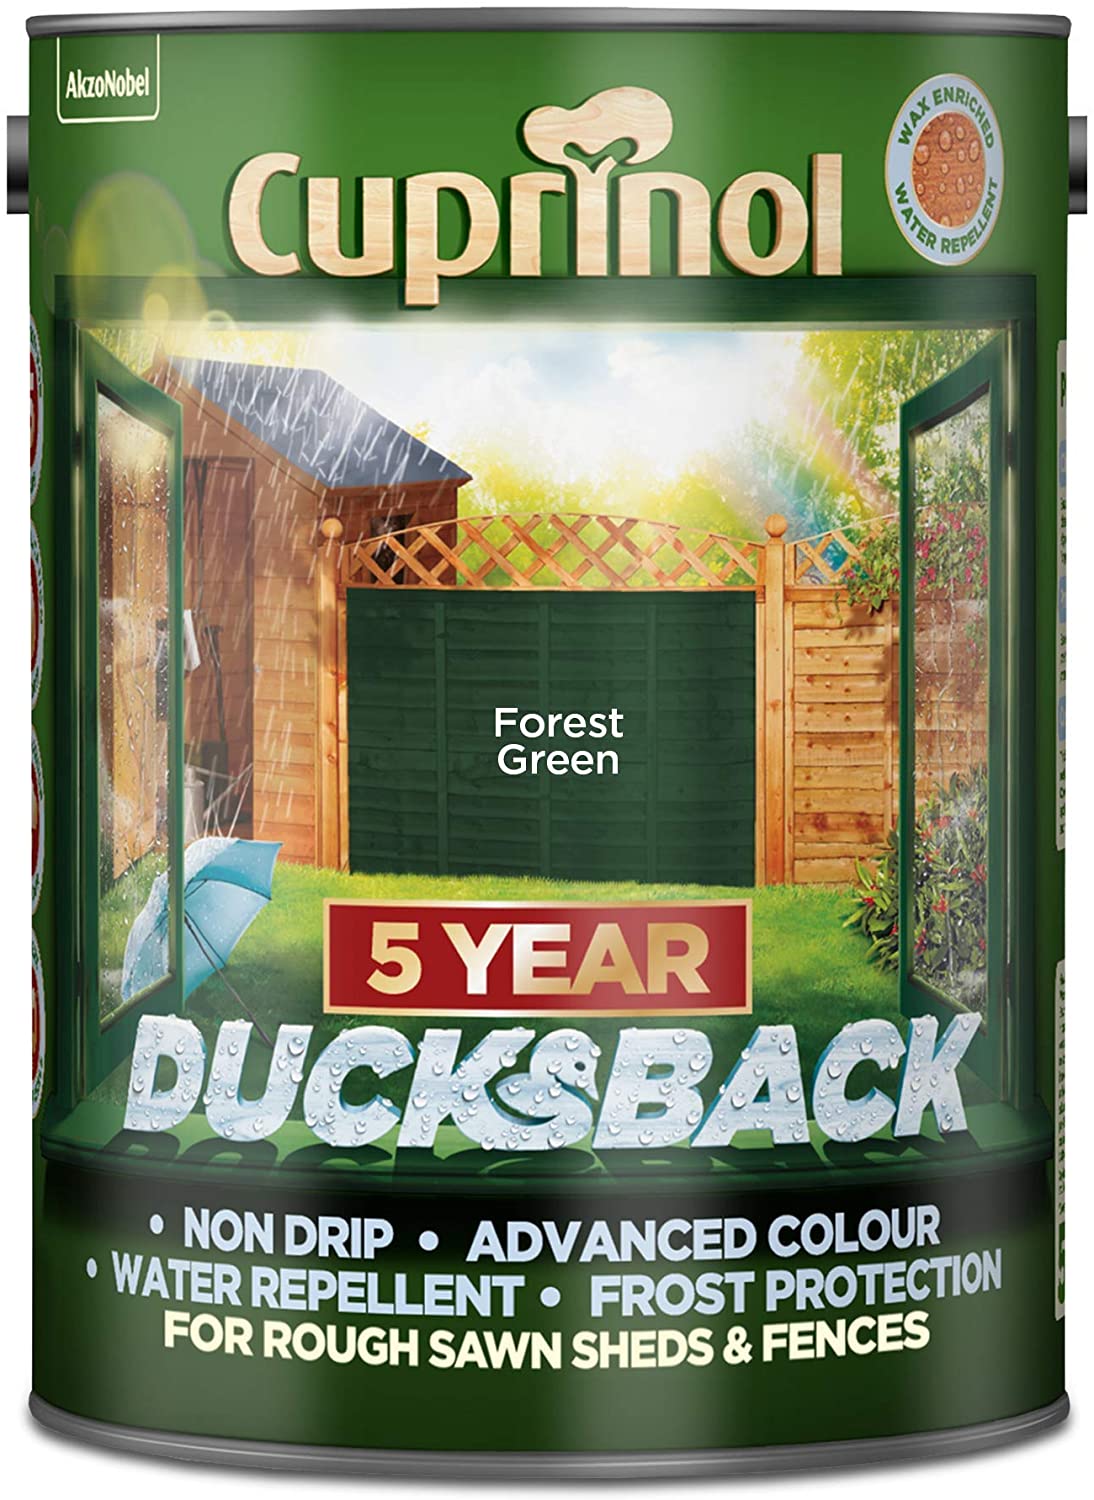 Cuprinol Ducksback 5 Year Waterproof For Sheds And Fences - Forest Green Litre Garden & Diy Home